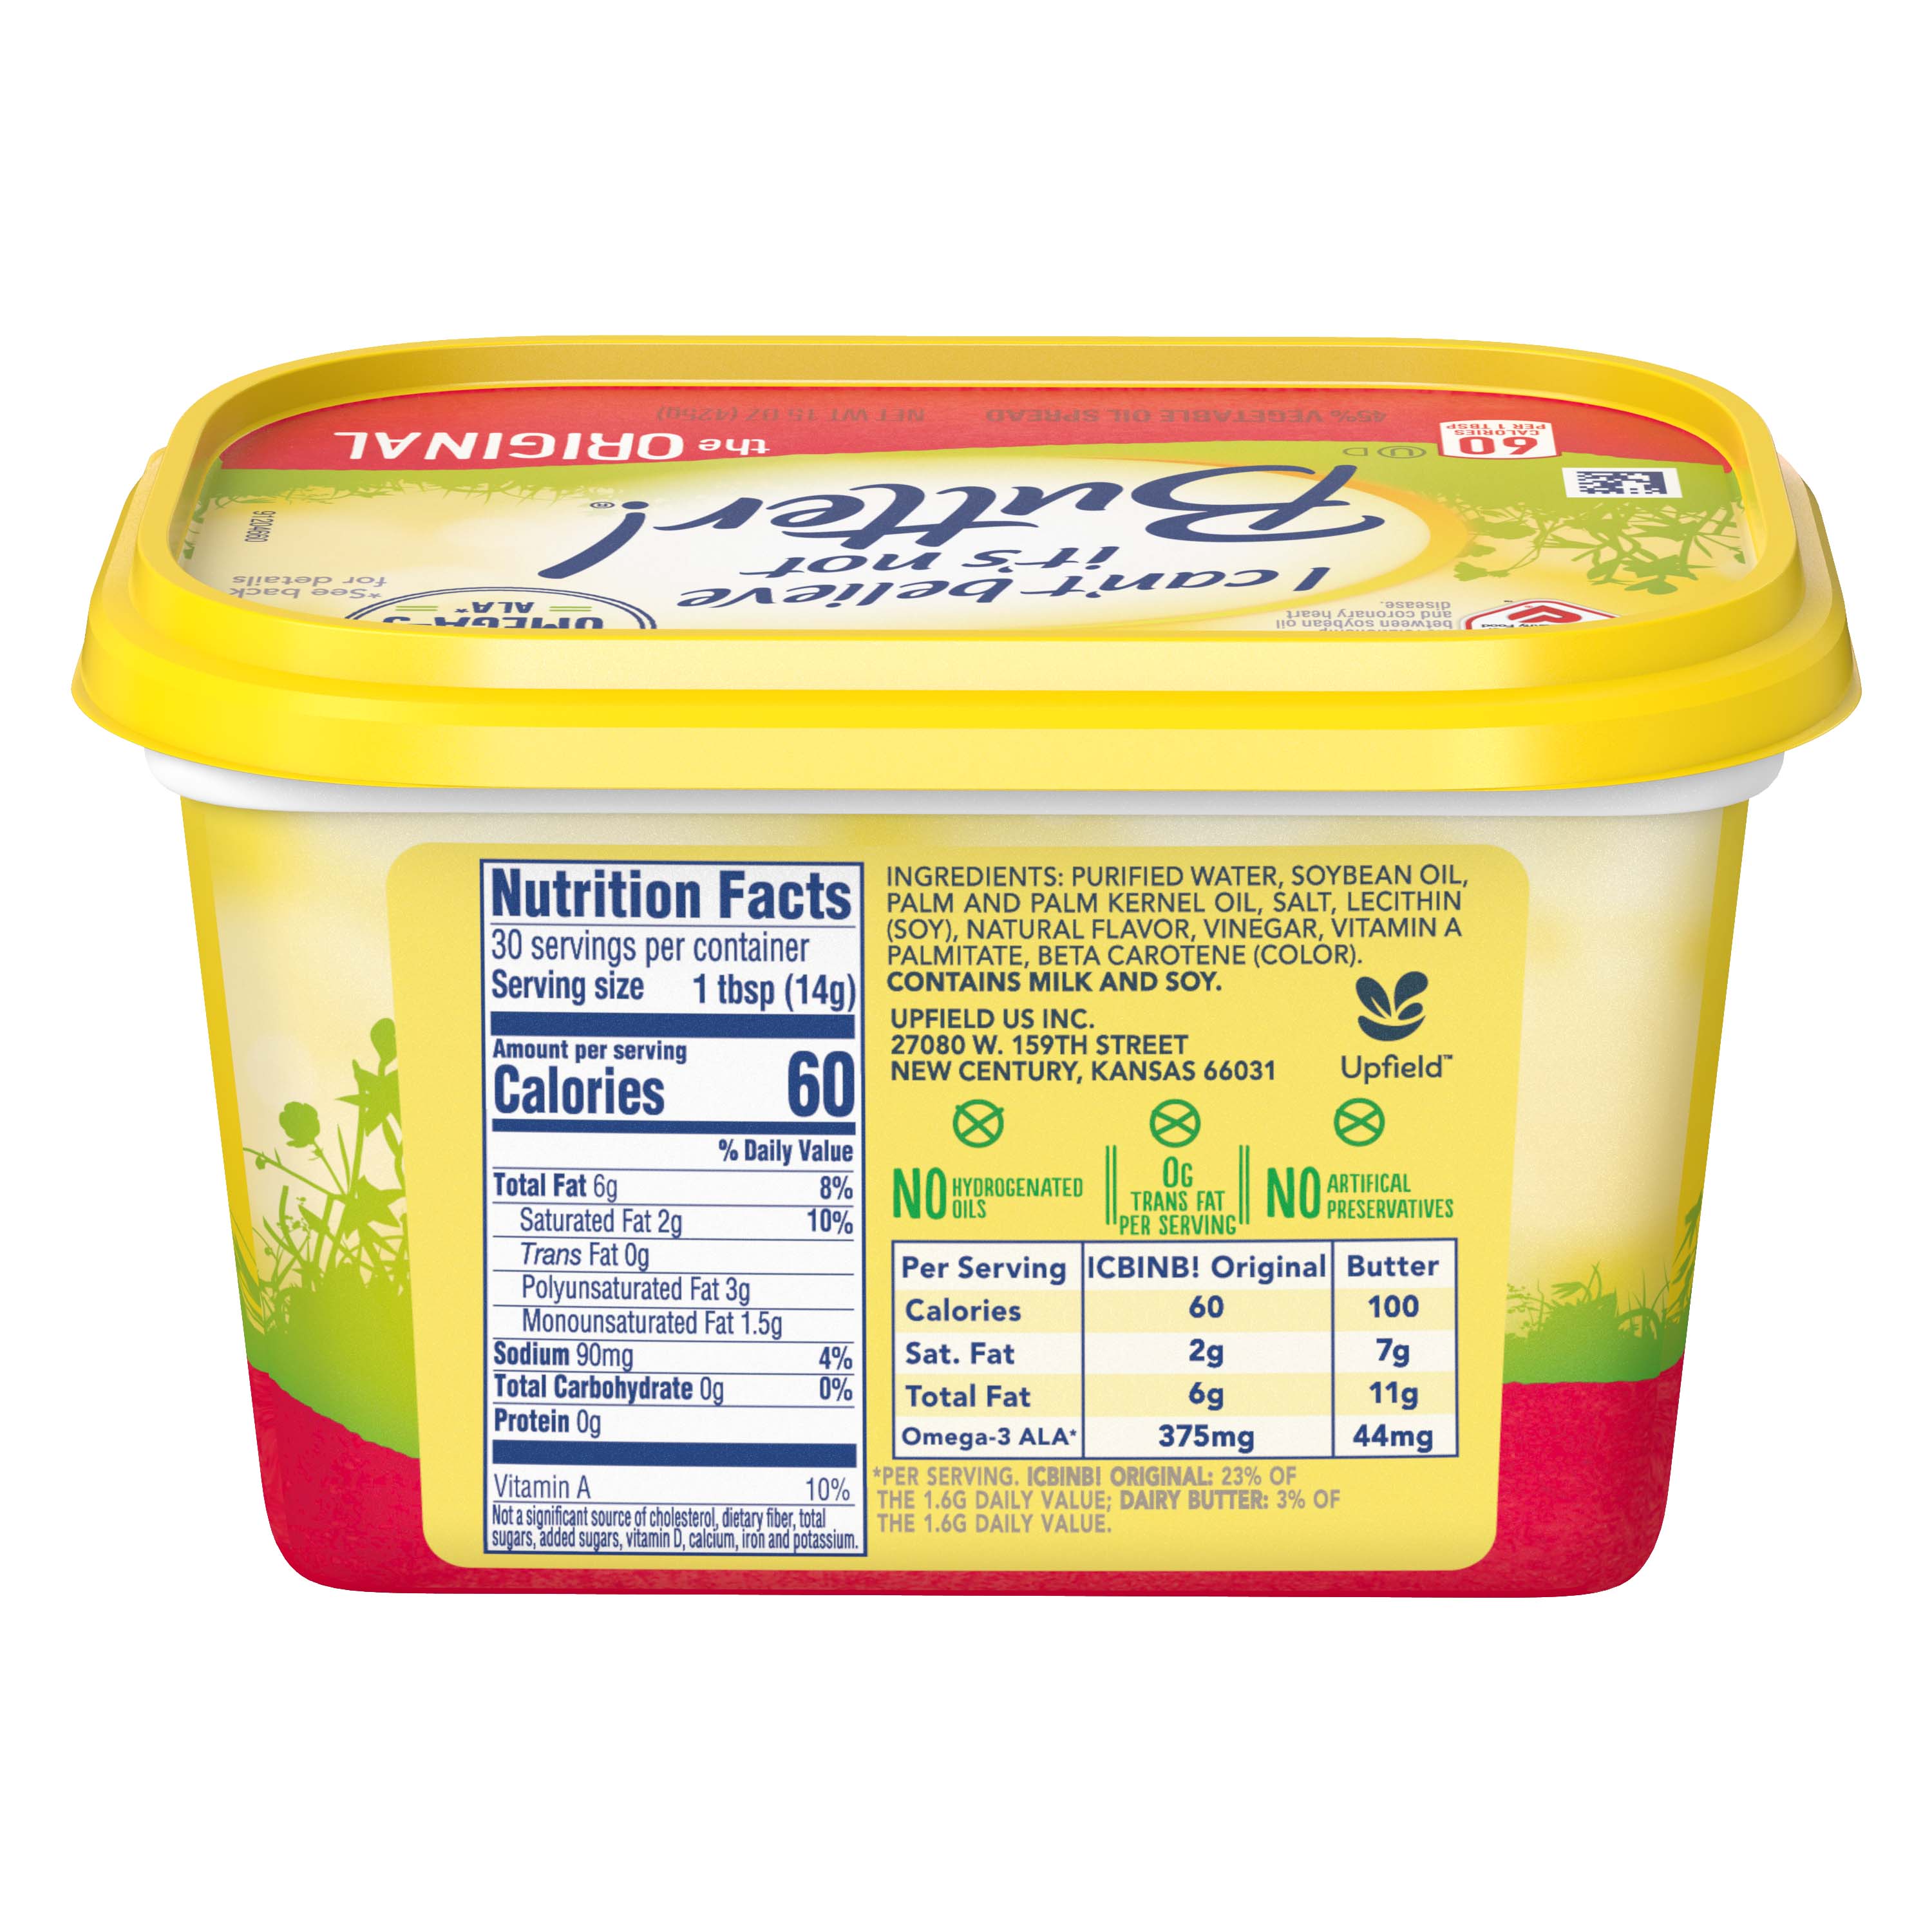 I Can't Believe It's Not Butter Original Spread, 15 oz Tub (Refrigerated) - image 4 of 9